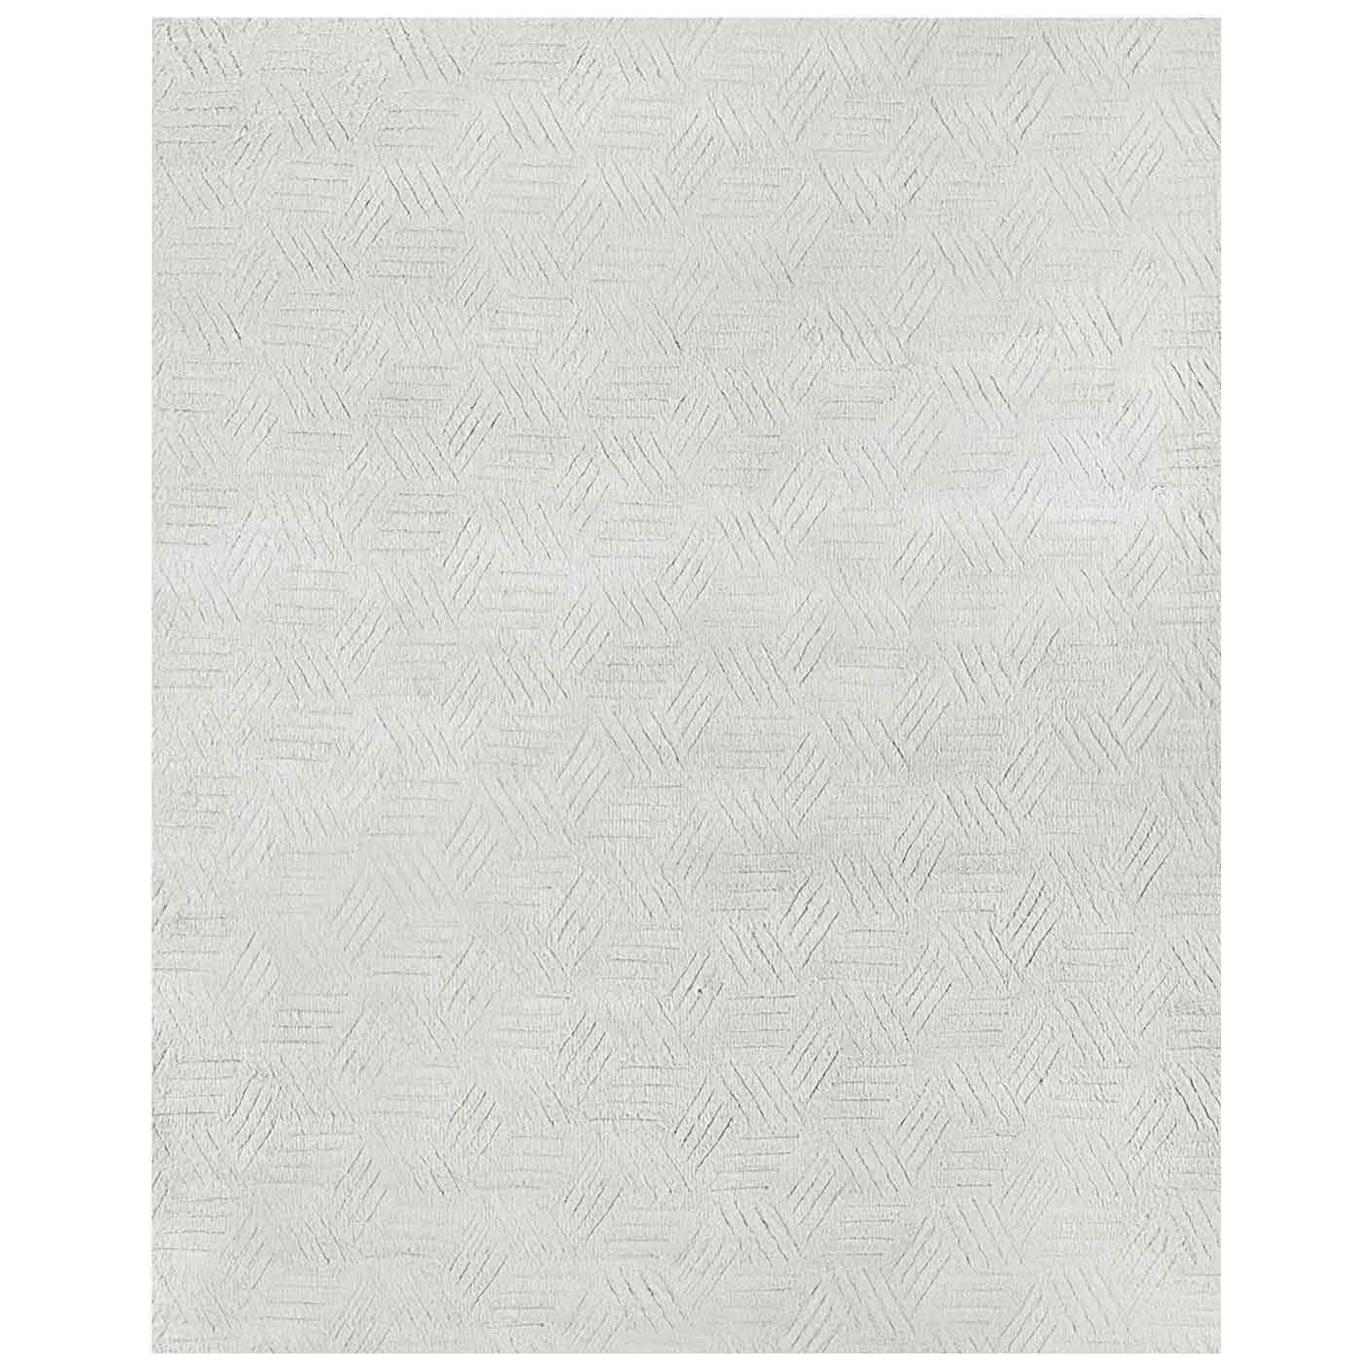 For Sale: Silver (Silver/Charcoal) Ben Soleimani Mirada Rug– Moroccan Hand-knotted Plush Silver/Charcoal 6'x9'